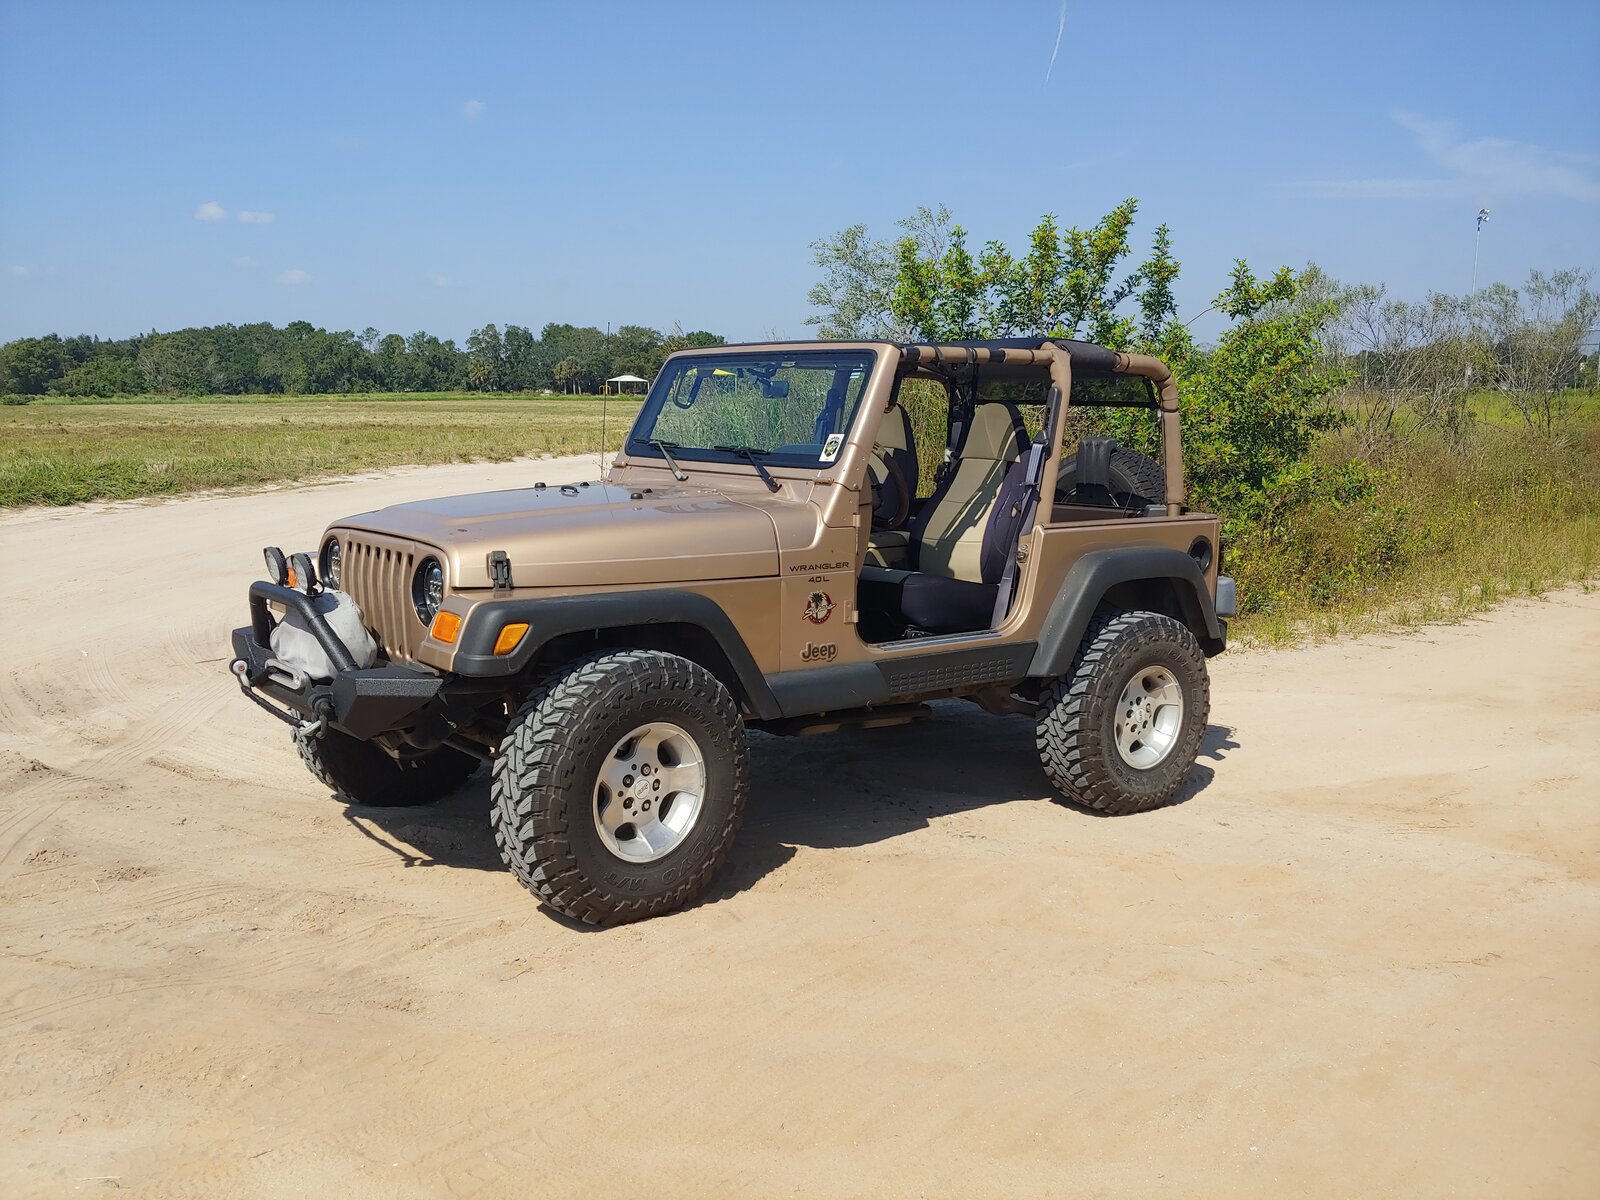 Show me your top off! | Page 5 | Jeep Wrangler TJ Forum